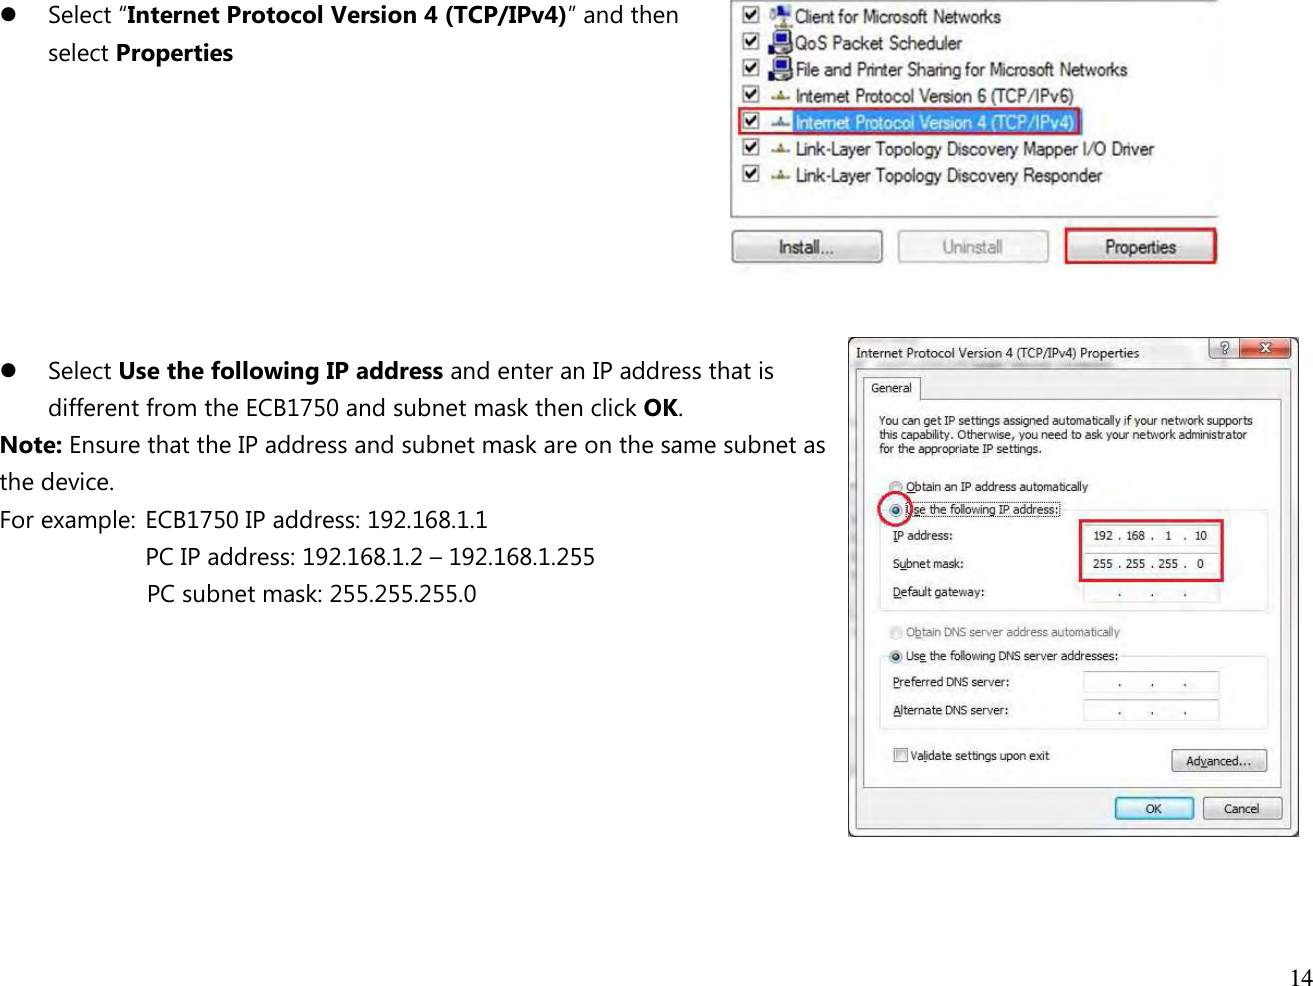  14   Select “Internet Protocol Version 4 (TCP/IPv4)” and then  select Properties         Select Use the following IP address and enter an IP address that is different from the ECB1750 and subnet mask then click OK. Note: Ensure that the IP address and subnet mask are on the same subnet as the device.   For example:  ECB1750 IP address: 192.168.1.1 PC IP address: 192.168.1.2 – 192.168.1.255   PC subnet mask: 255.255.255.0     